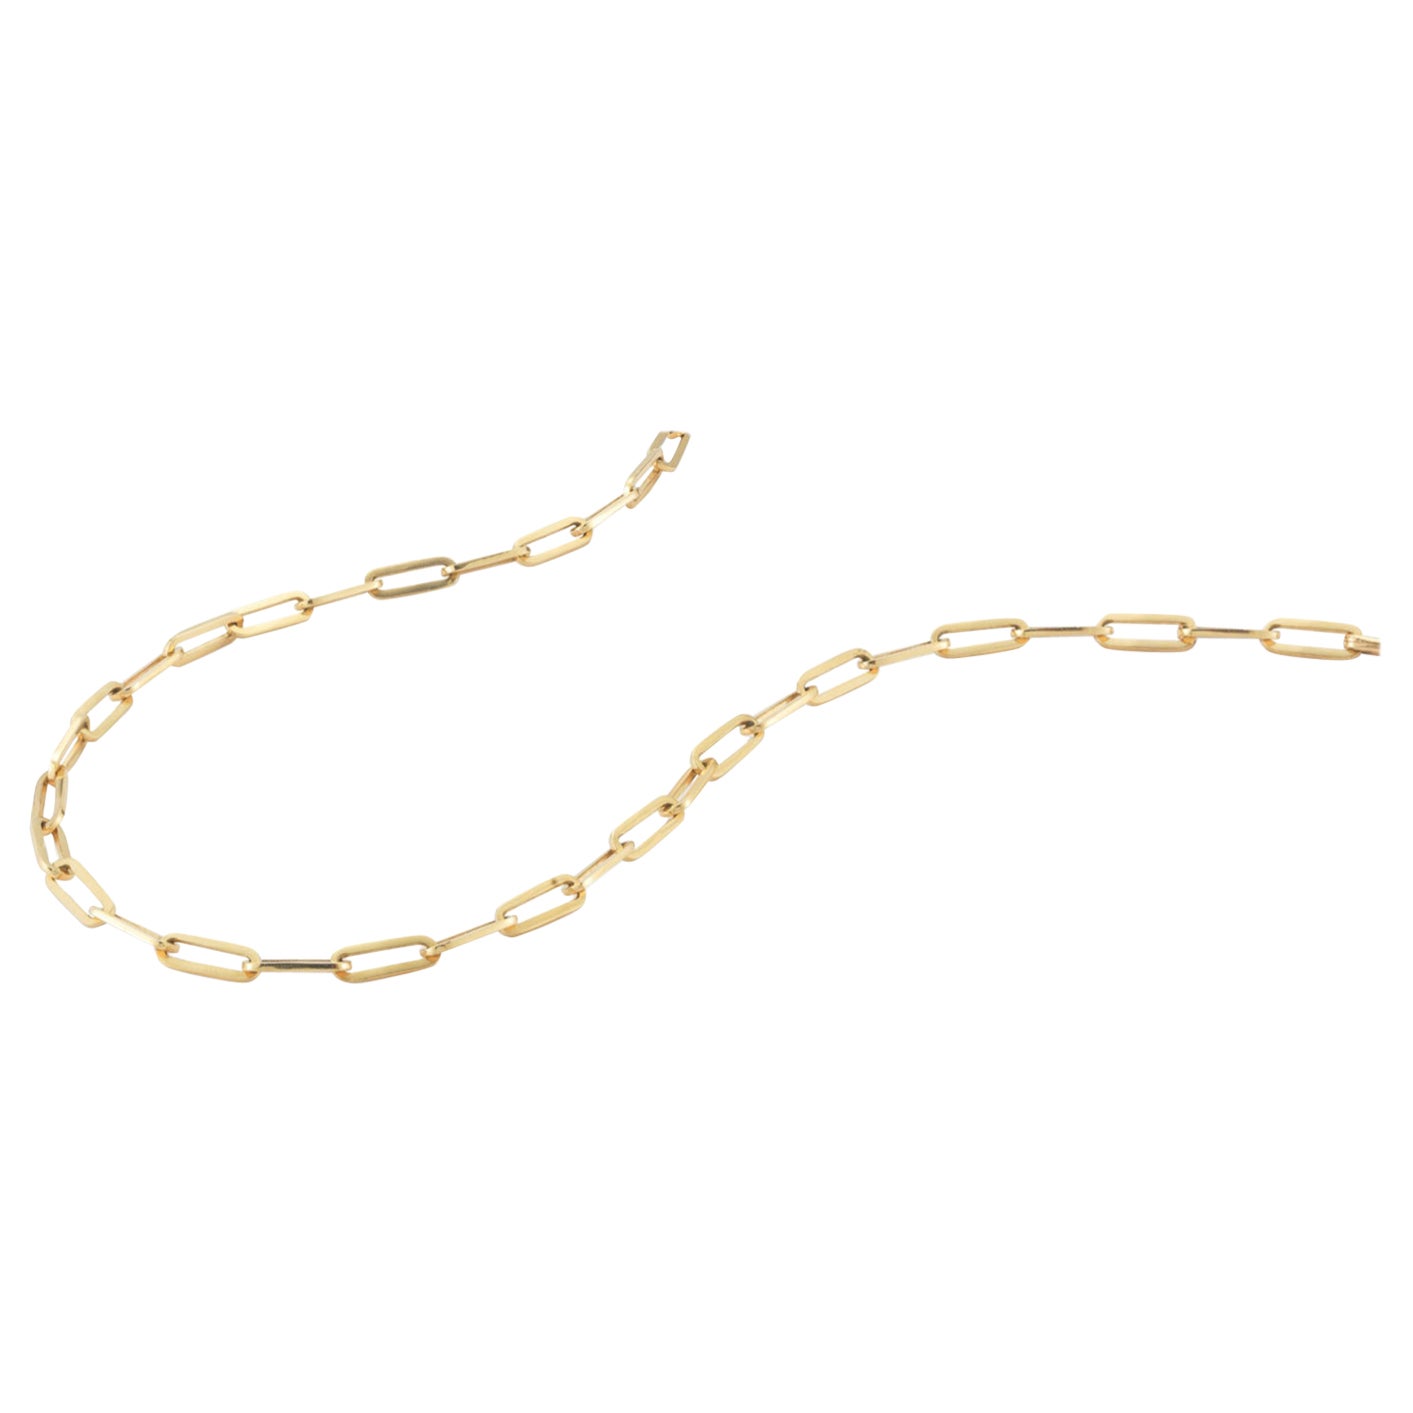 Garland Collection 14k Yellow, Rose or White Gold Handmade Link Necklace Chain For Sale